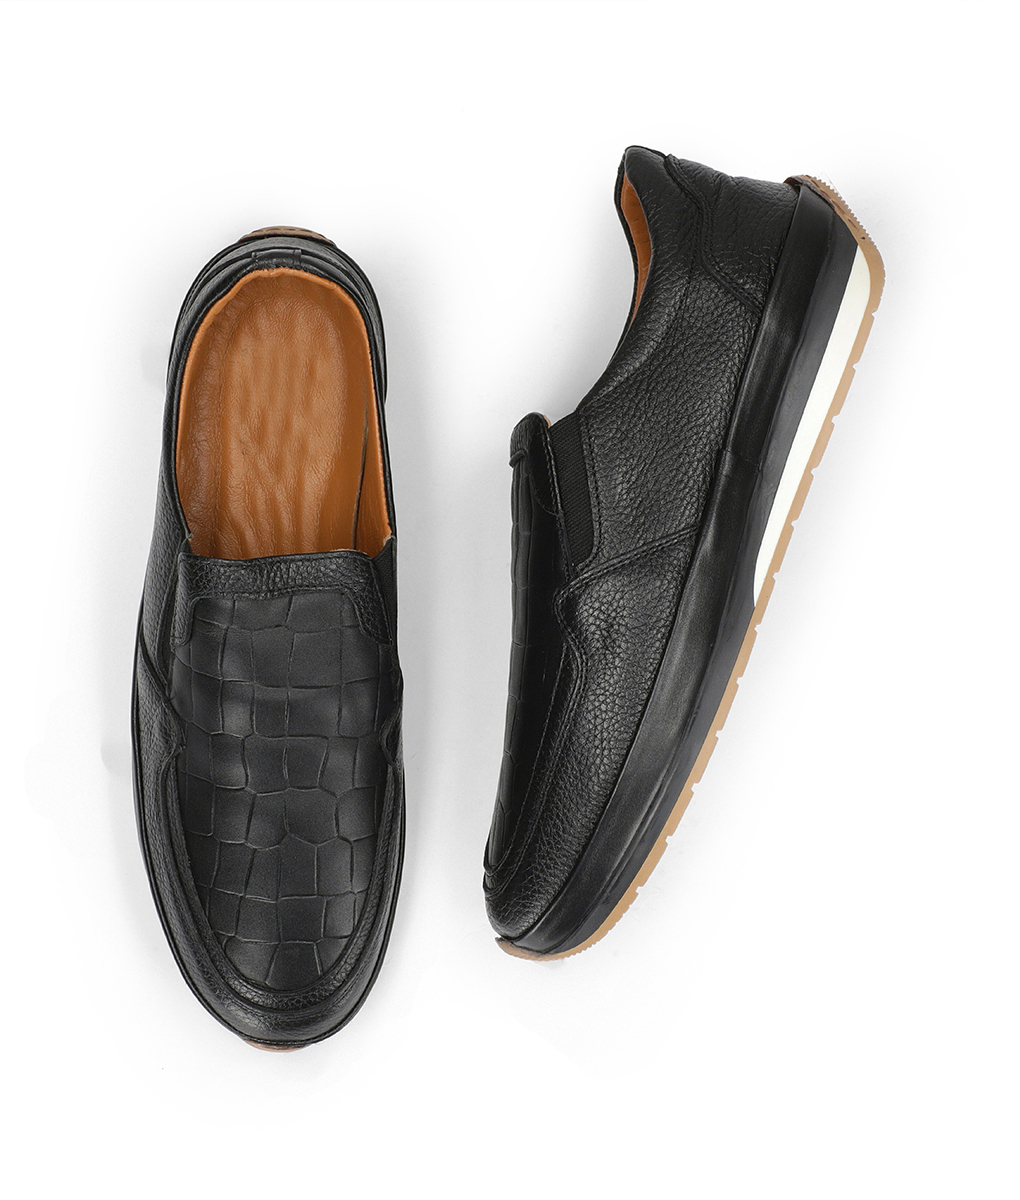 Somber Black Crocodile Style Leather Shoes for Men